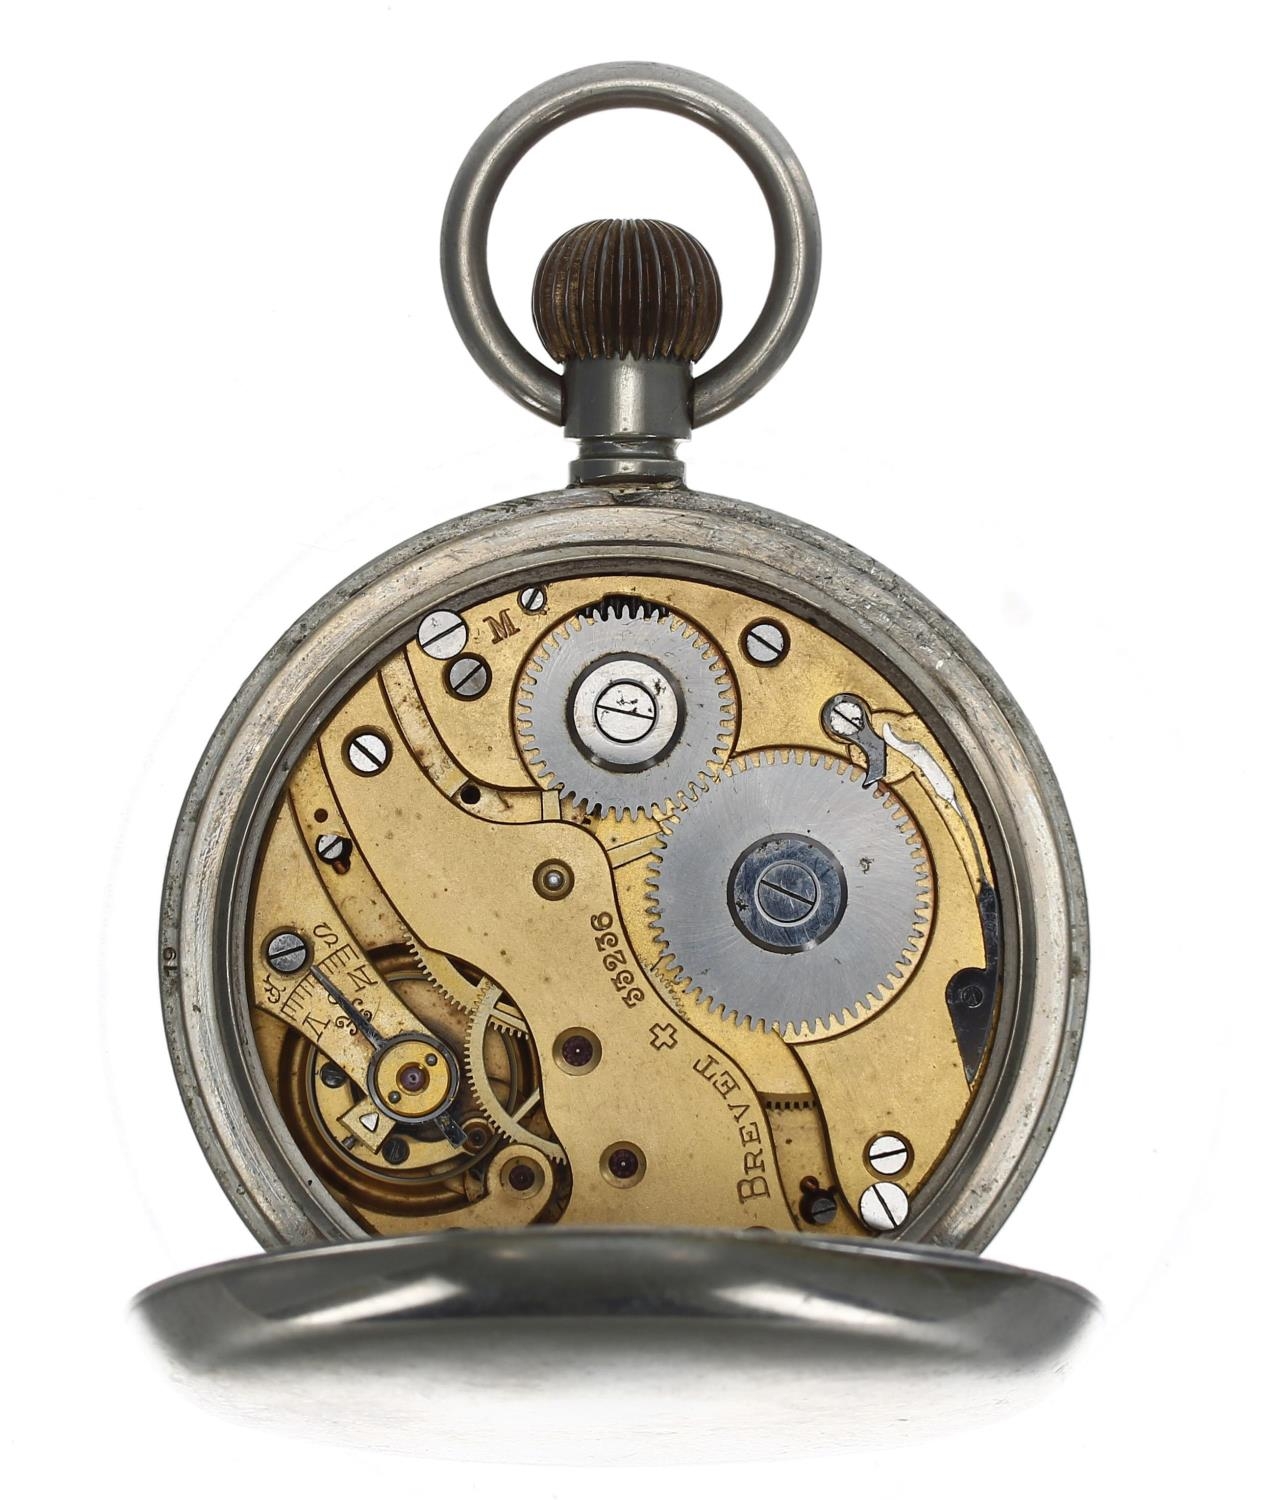 Goliath 8 days nickel cased lever pocket watch, the movement stamped Brevet, no. 33236, with - Image 2 of 3